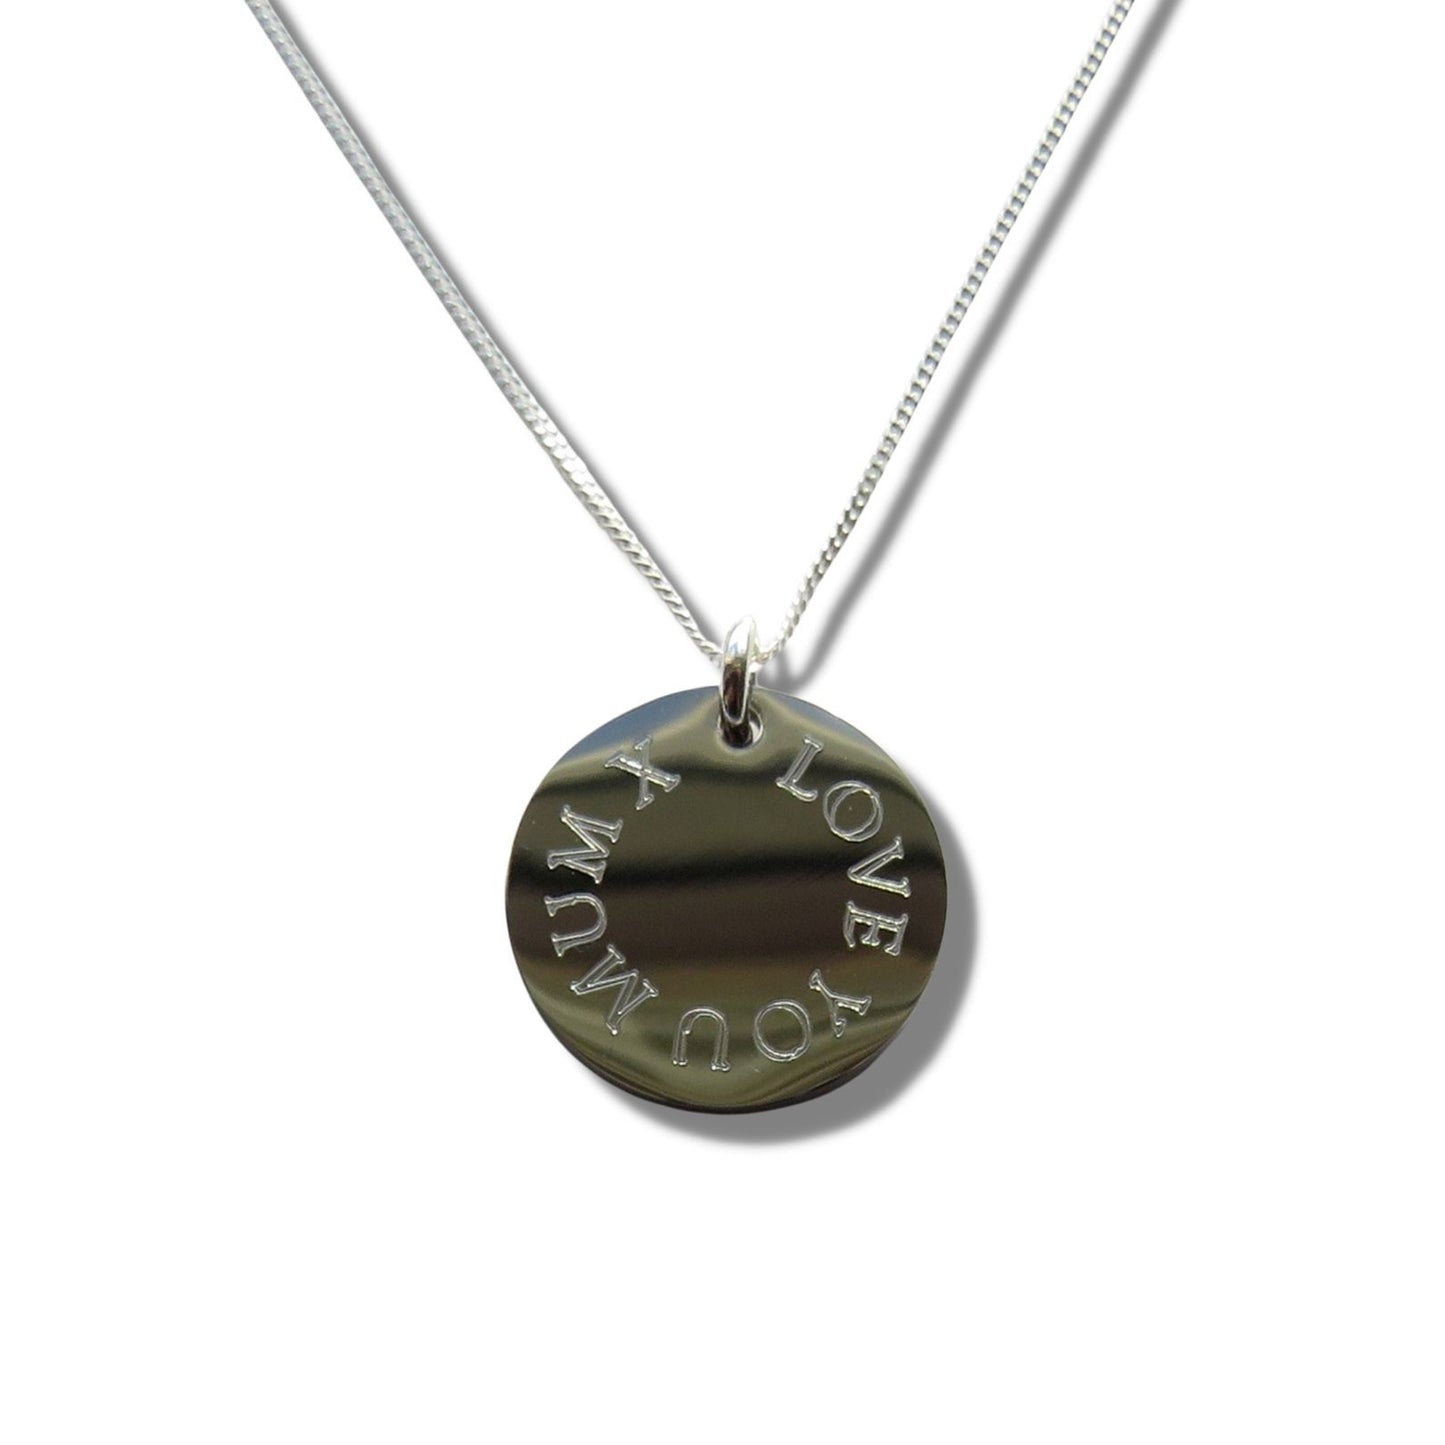 Edge Engraved  Necklace - I LOVE YOU MUM X